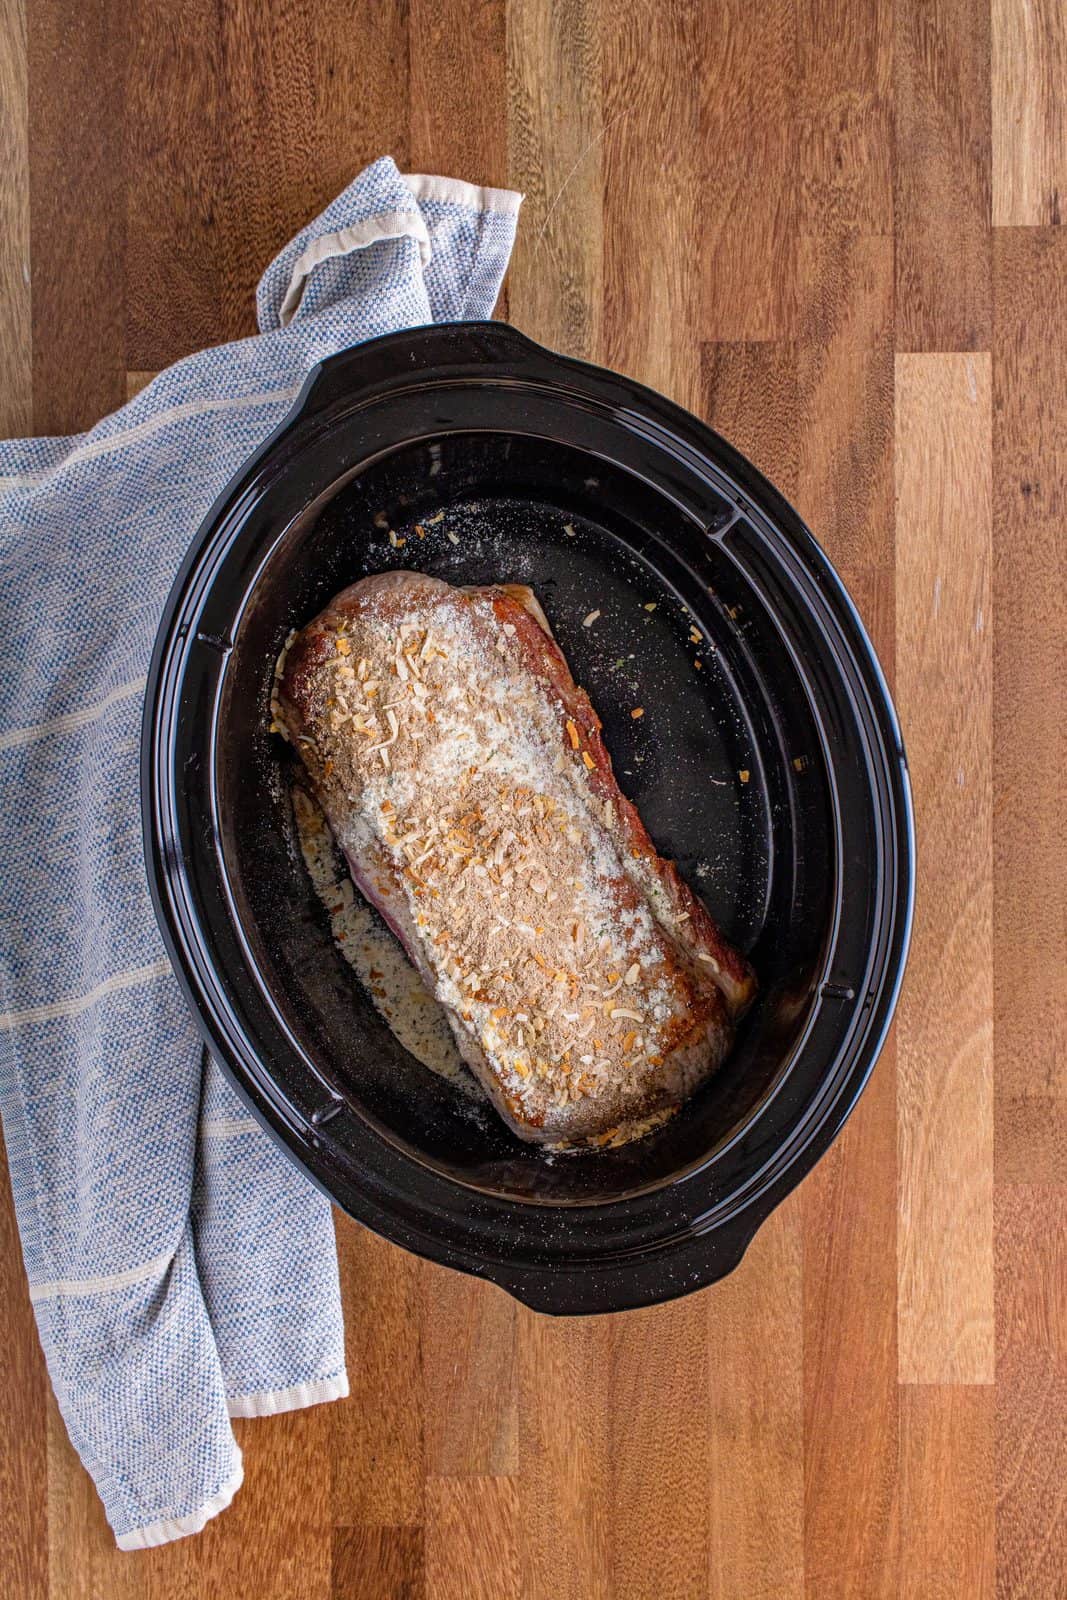 ranch dressing seasoning and French onion soup mix sprinkled evenly on top of pork roast in the slow cooker.